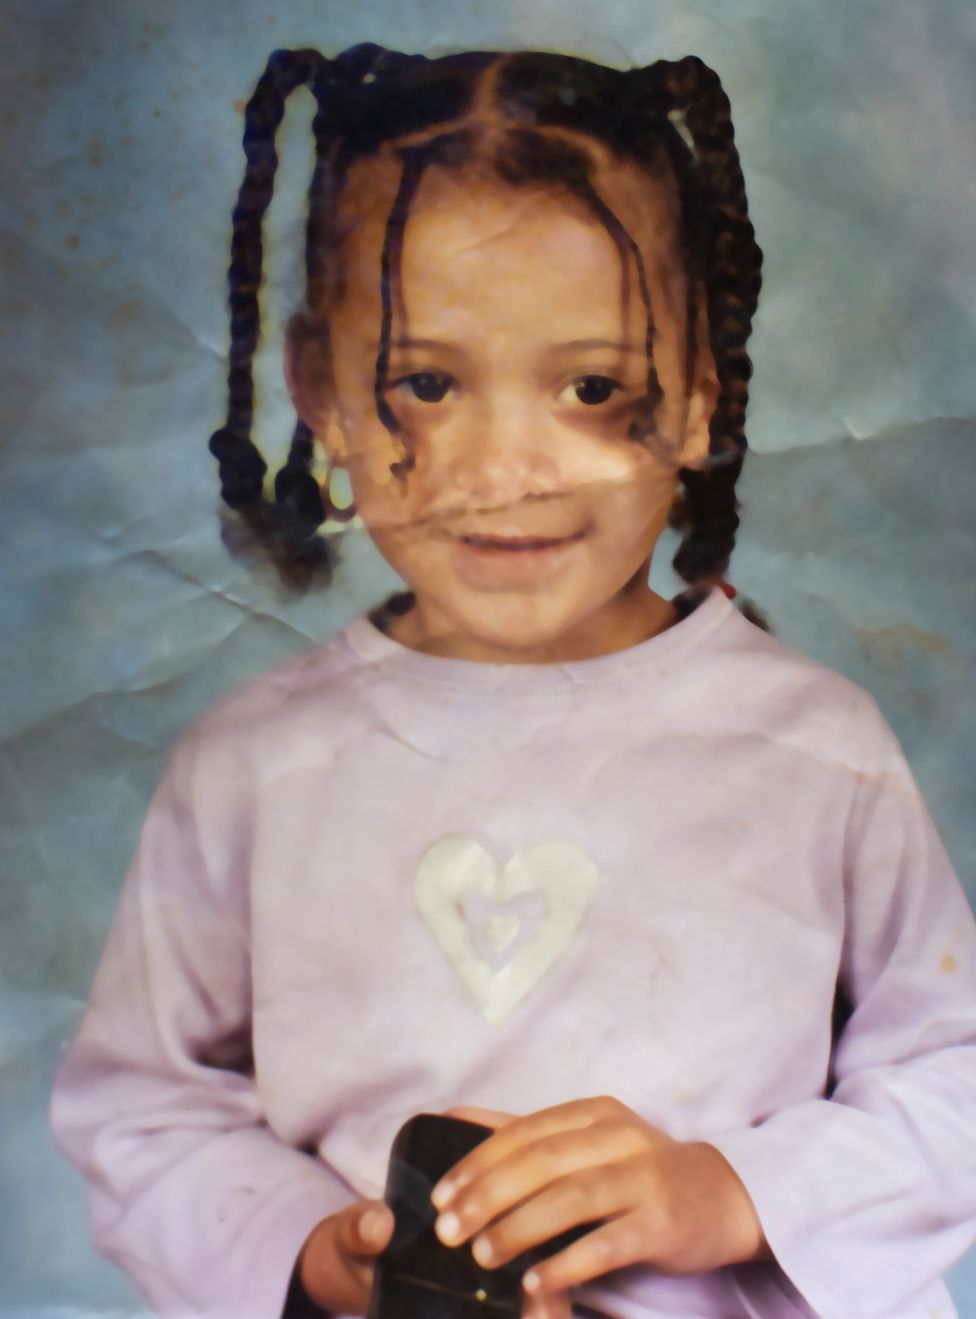 Aliyah as a child